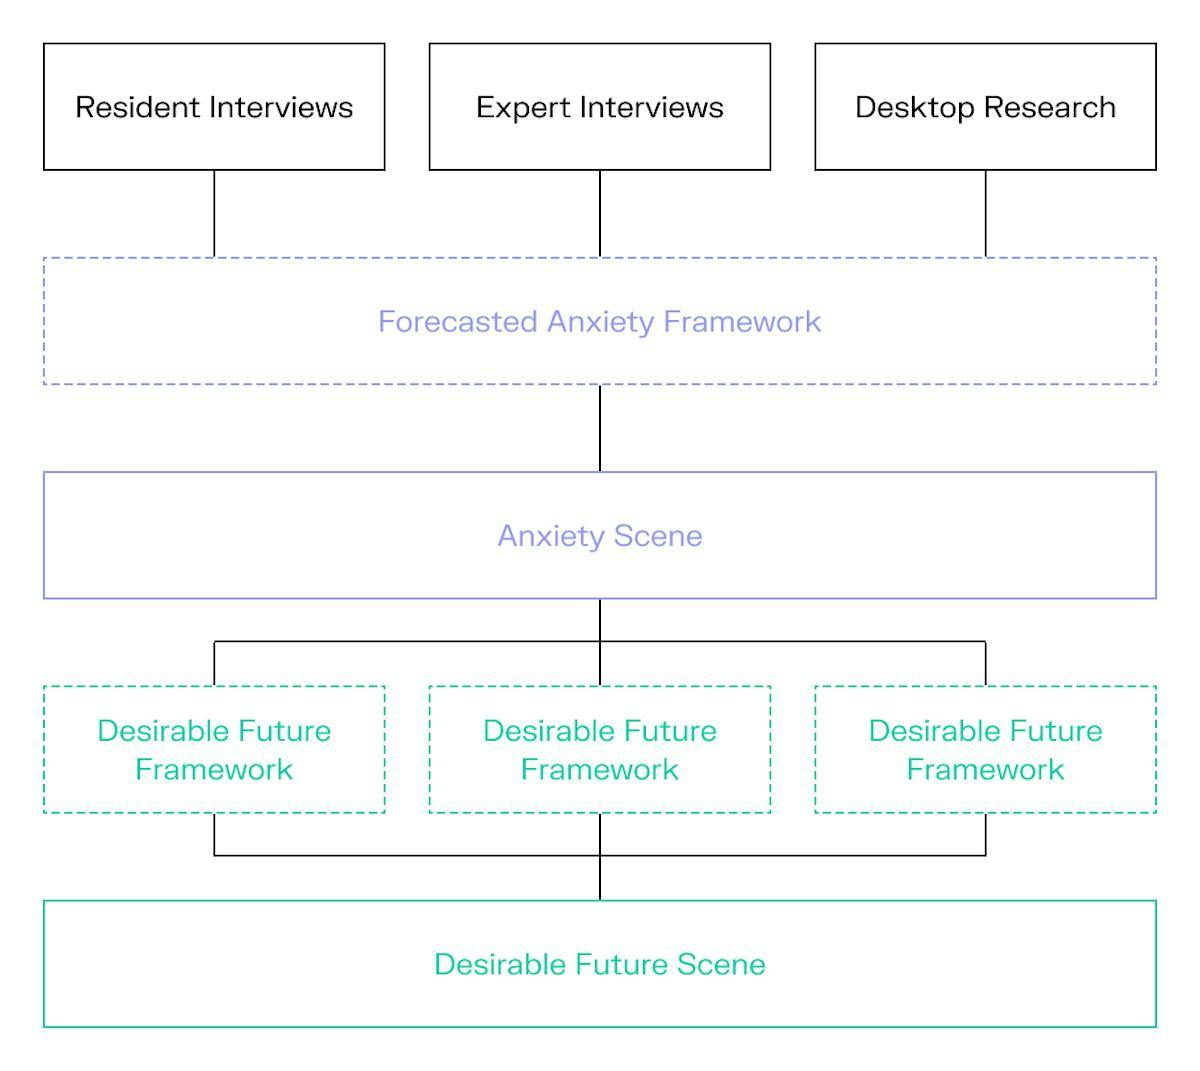 Final Research Structure